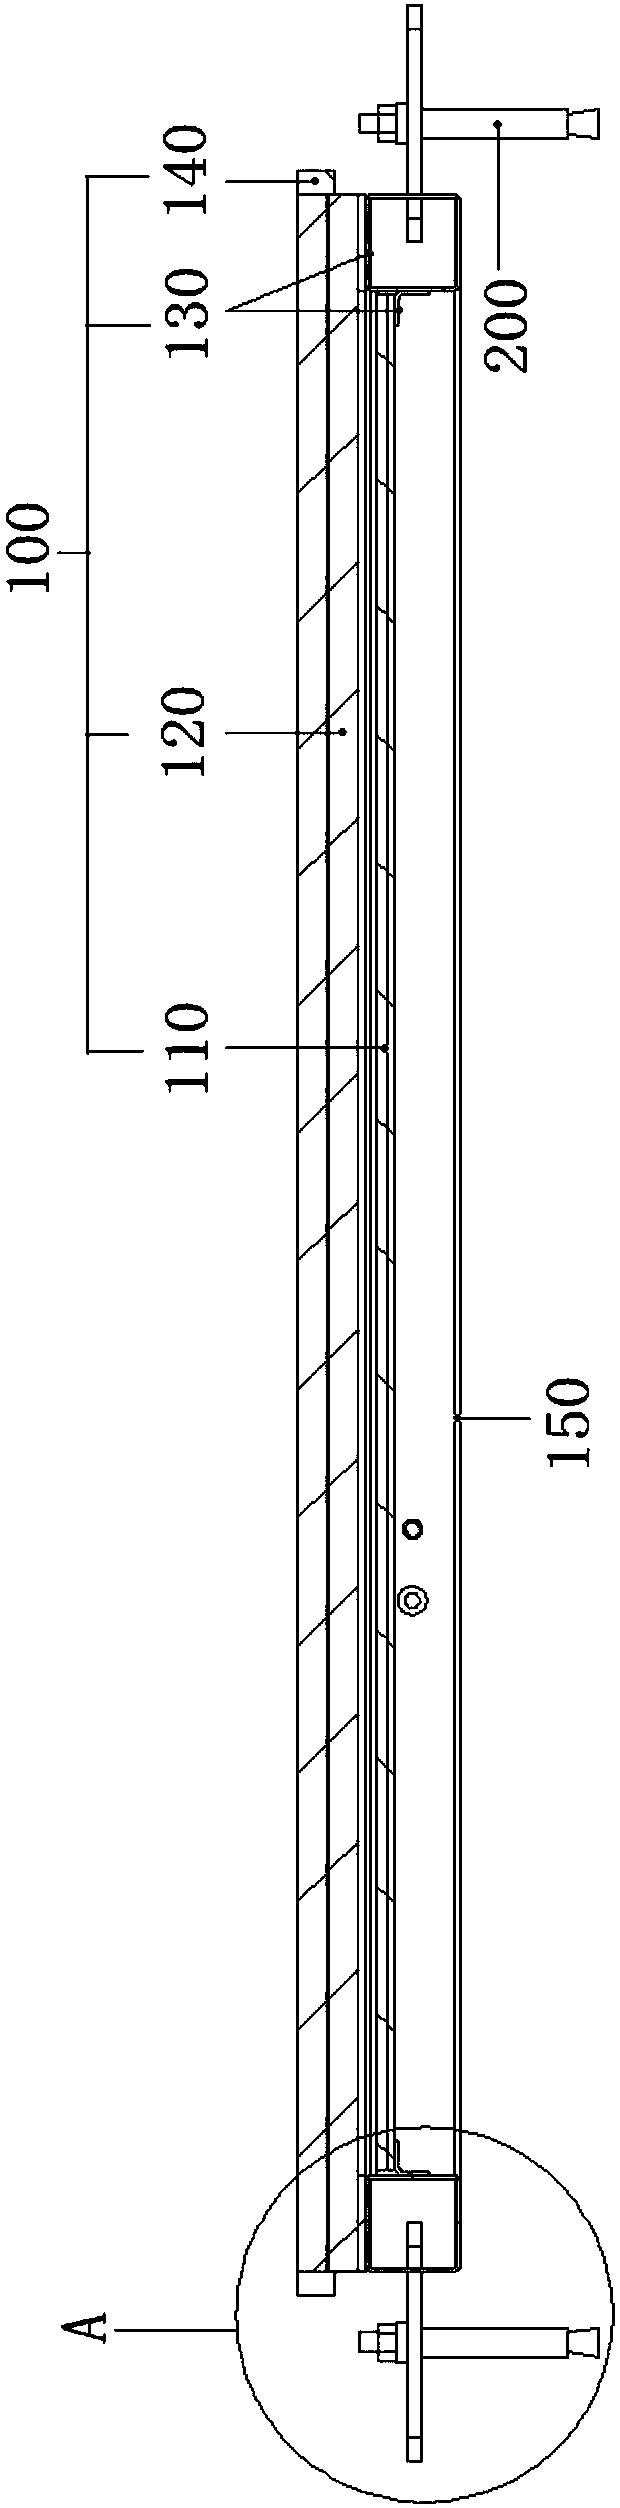 Photovoltaic unit and device